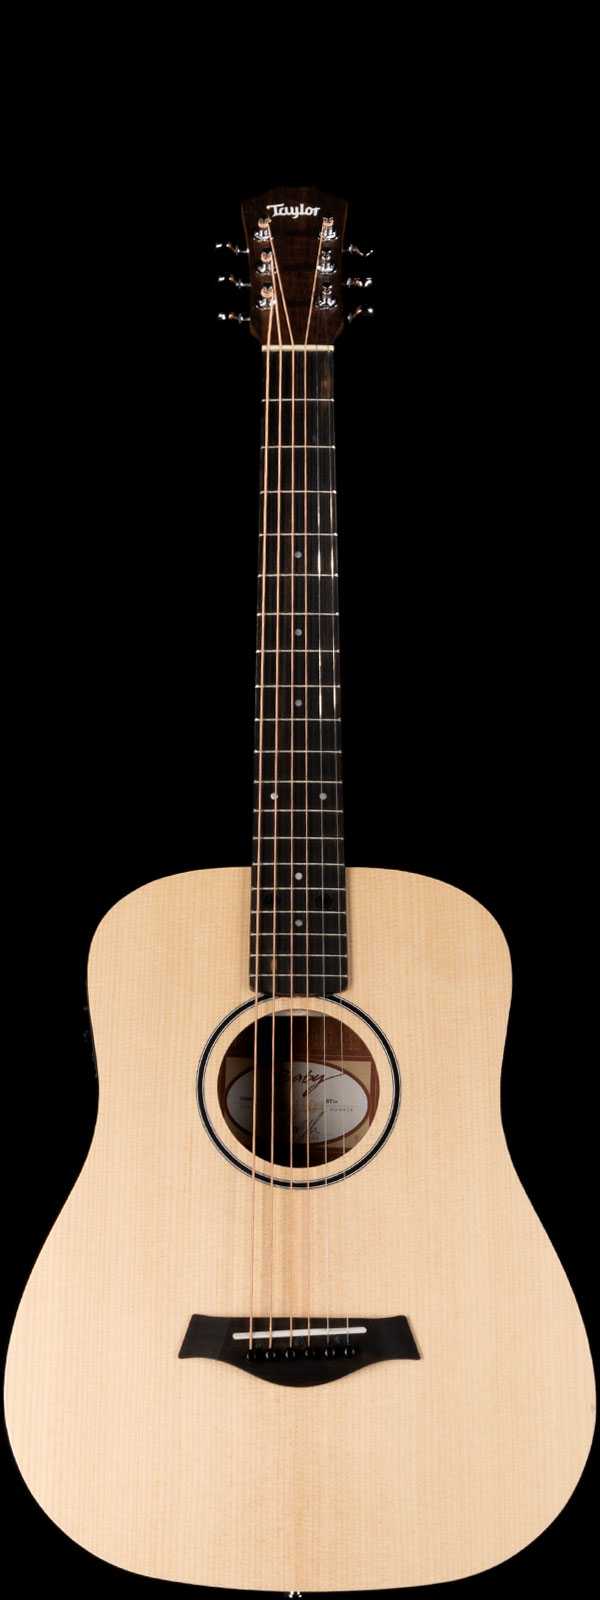 Taylor Baby Taylor BT1e Acoustic-Electric Sitka Spruce Top Natural